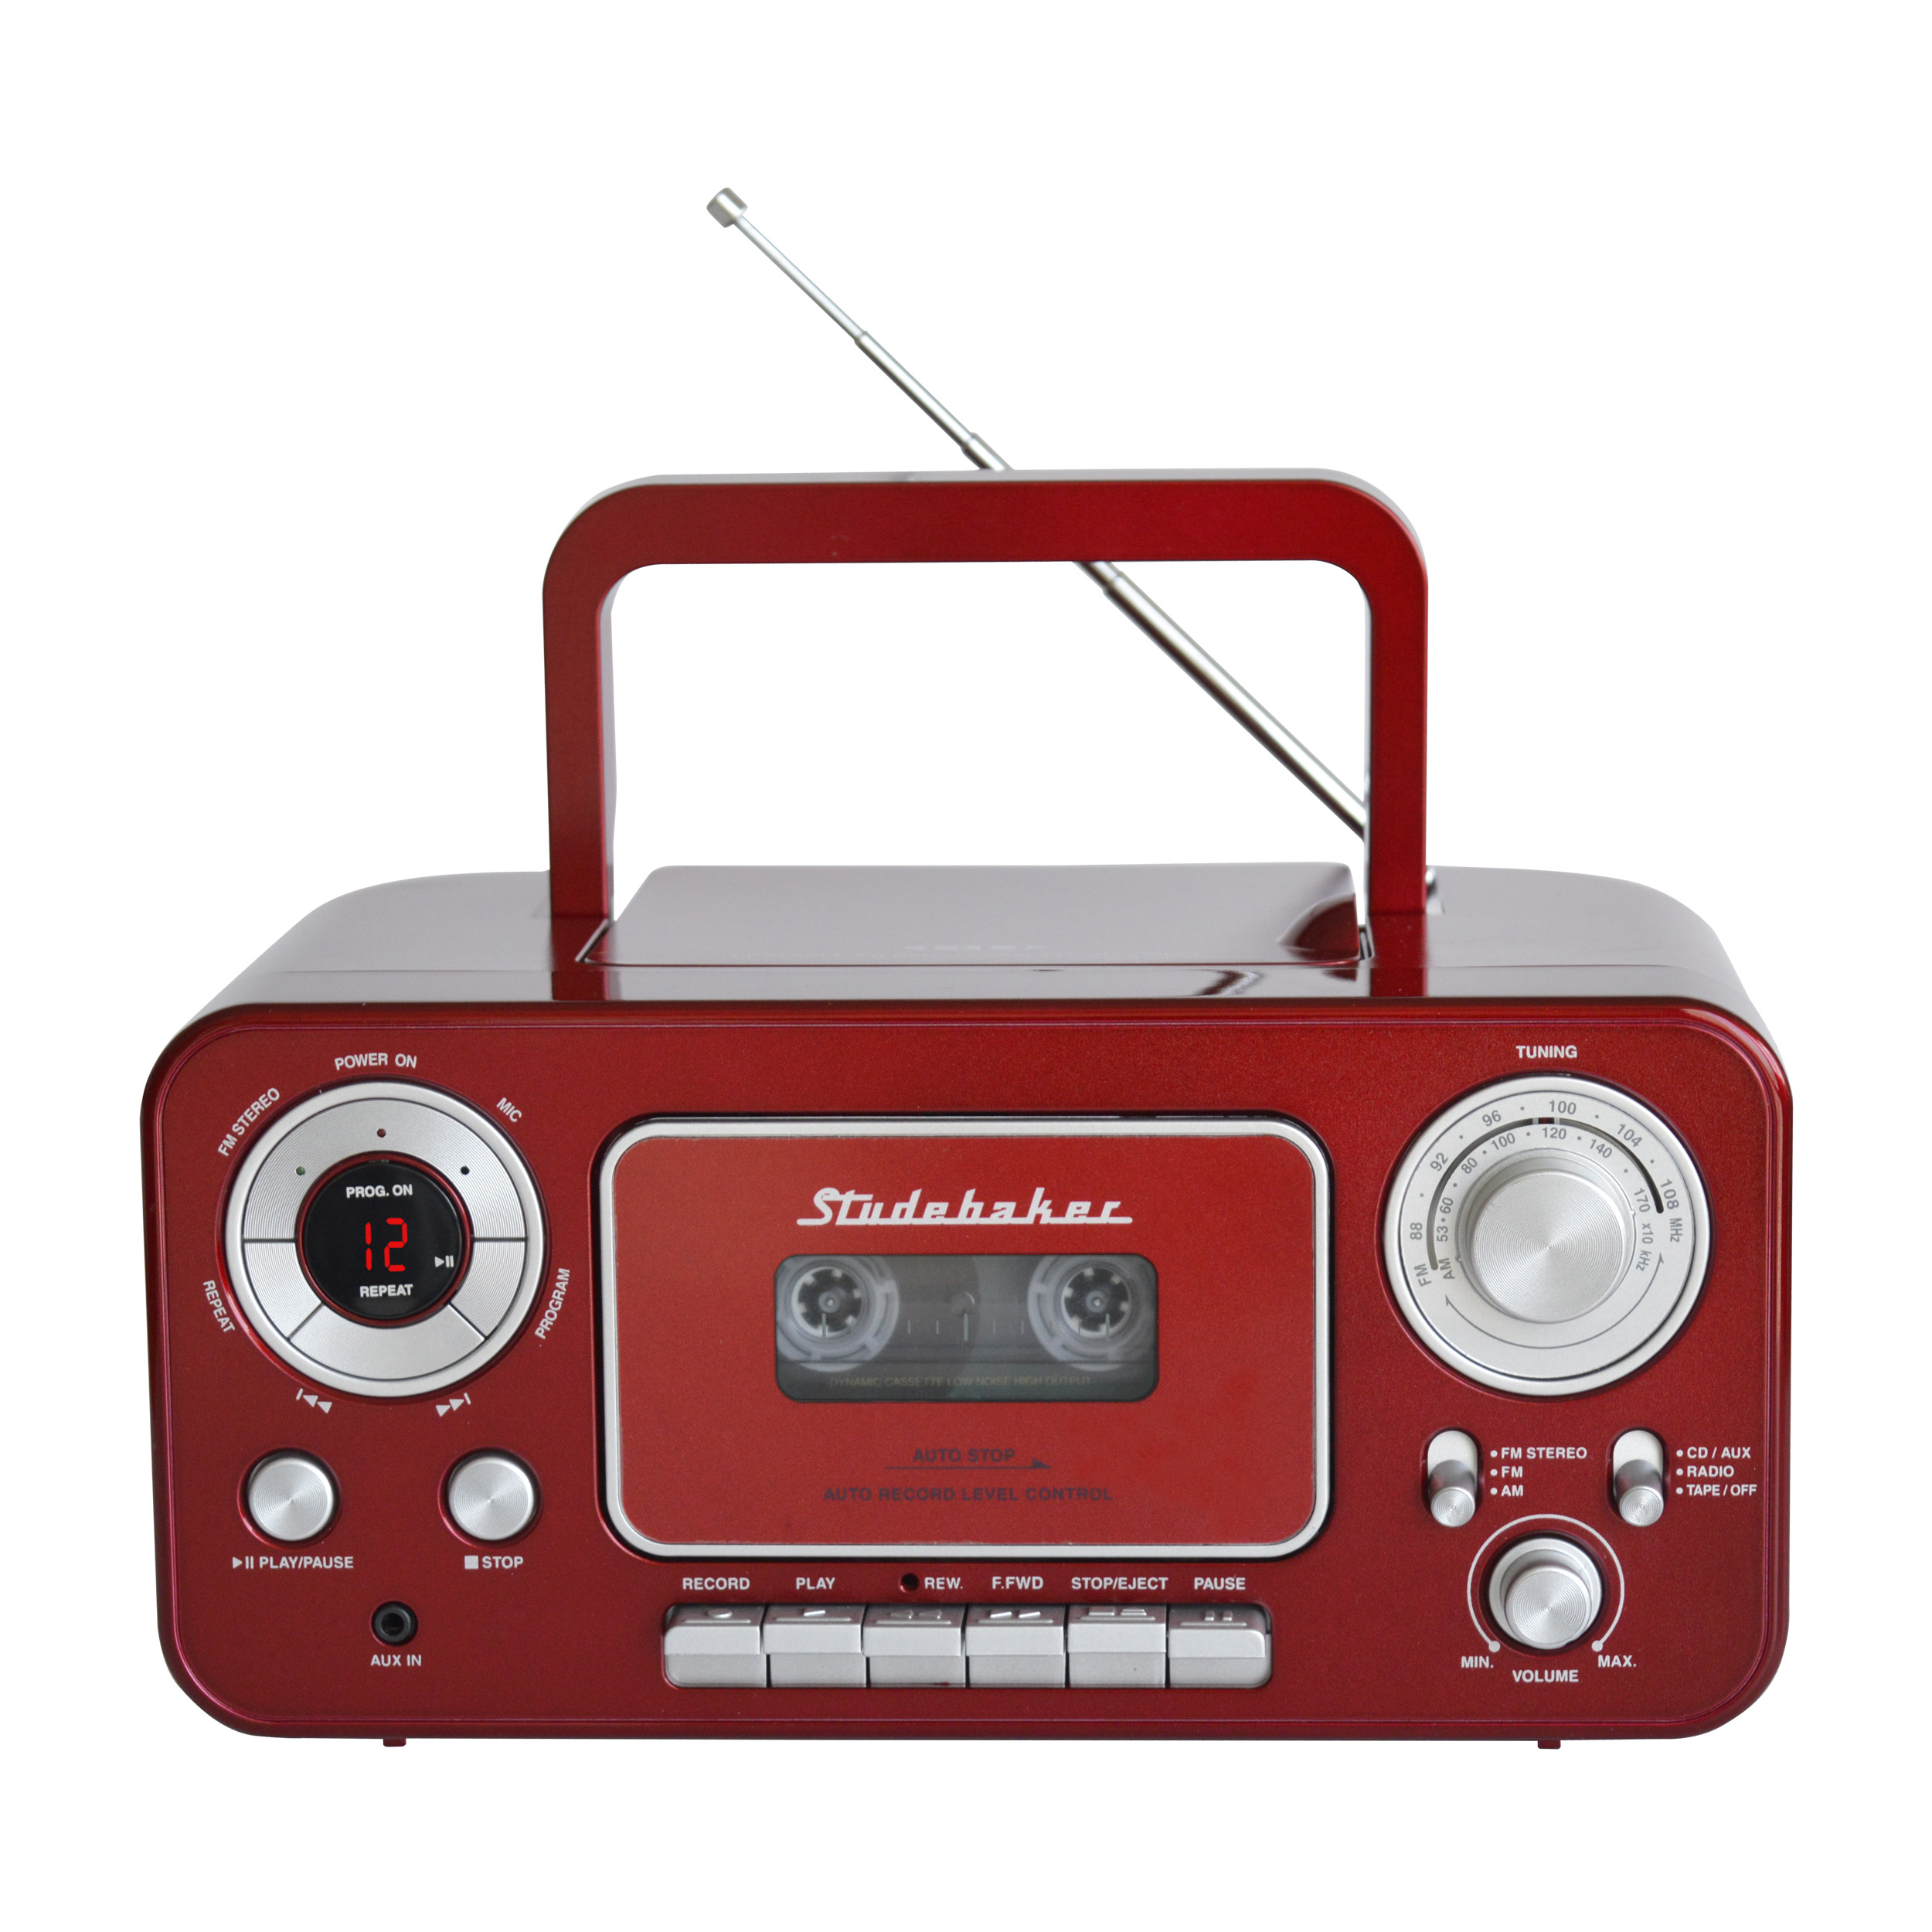 Portable Stereo CD Player with AM/FM Radio and Cassette Player/Recorder - image 2 of 5